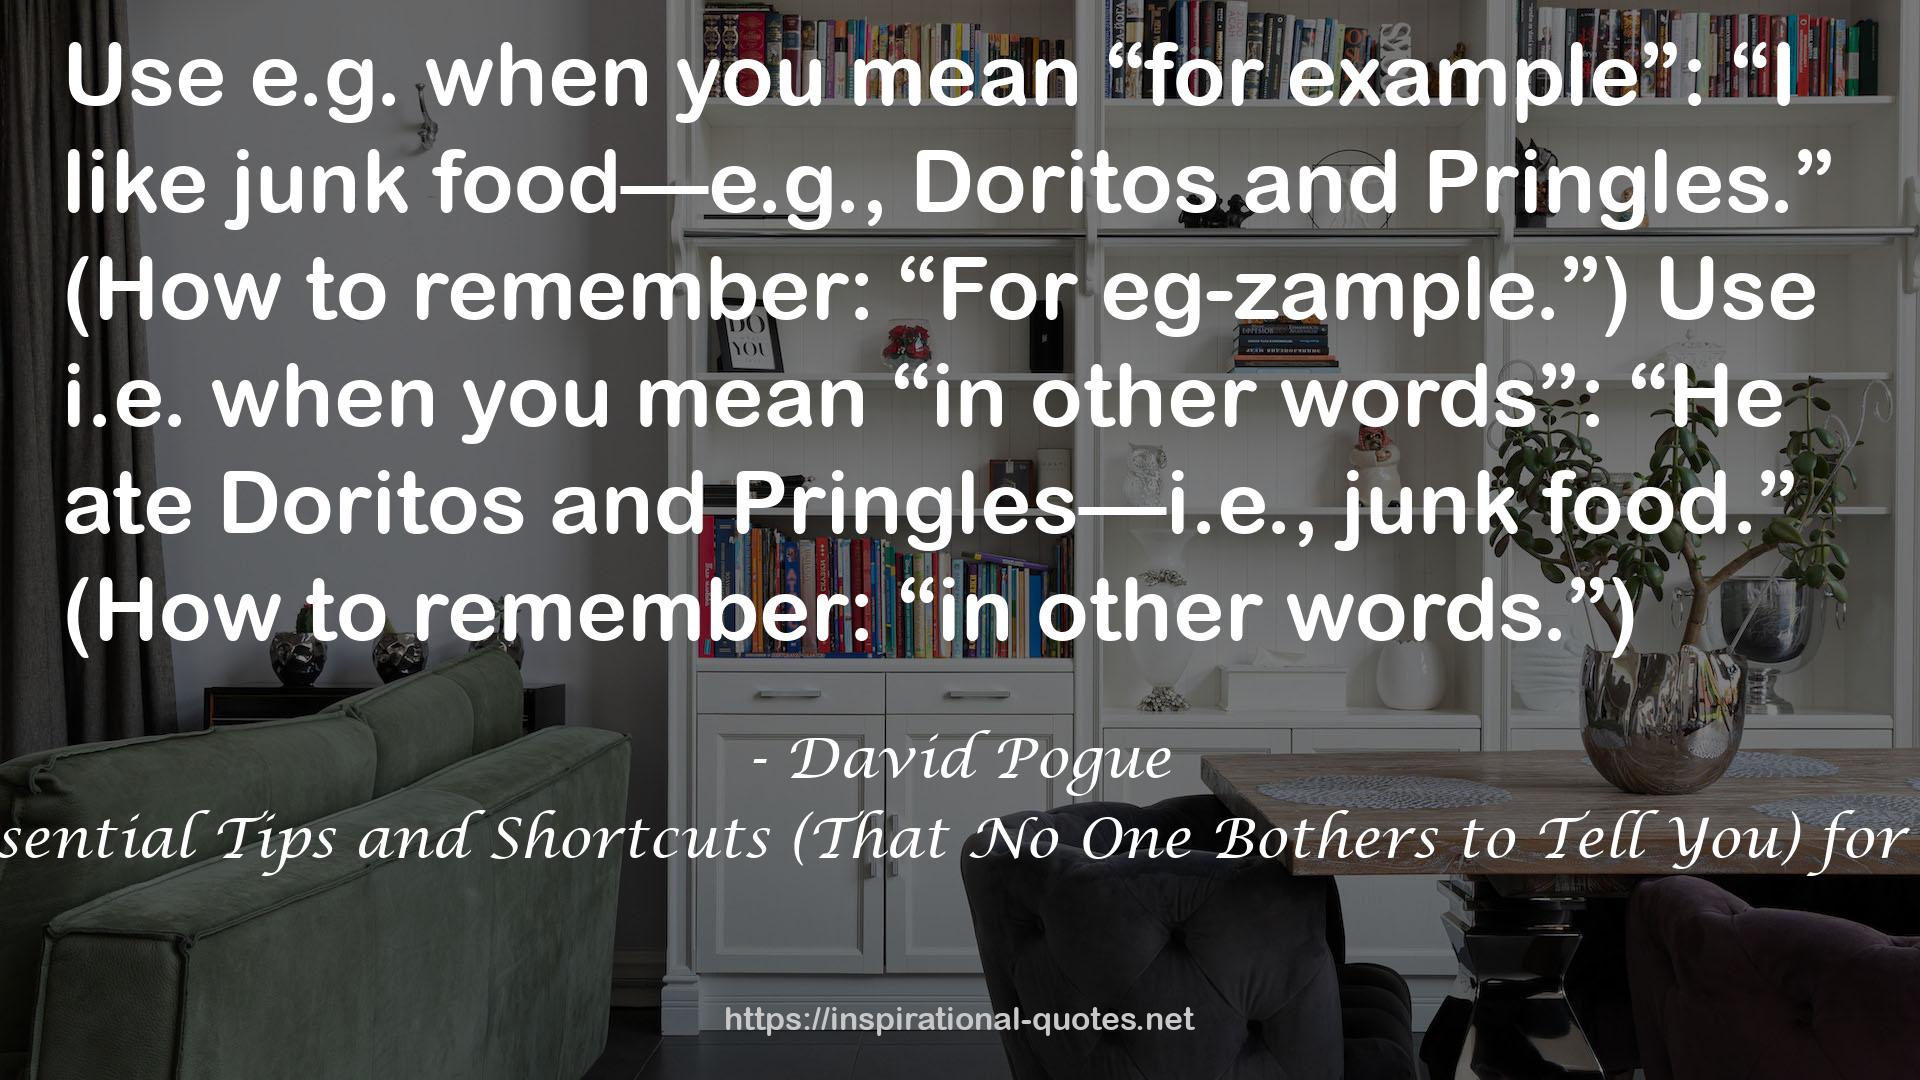 Pogue's Basics: Life: Essential Tips and Shortcuts (That No One Bothers to Tell You) for Simplifying Your Day QUOTES